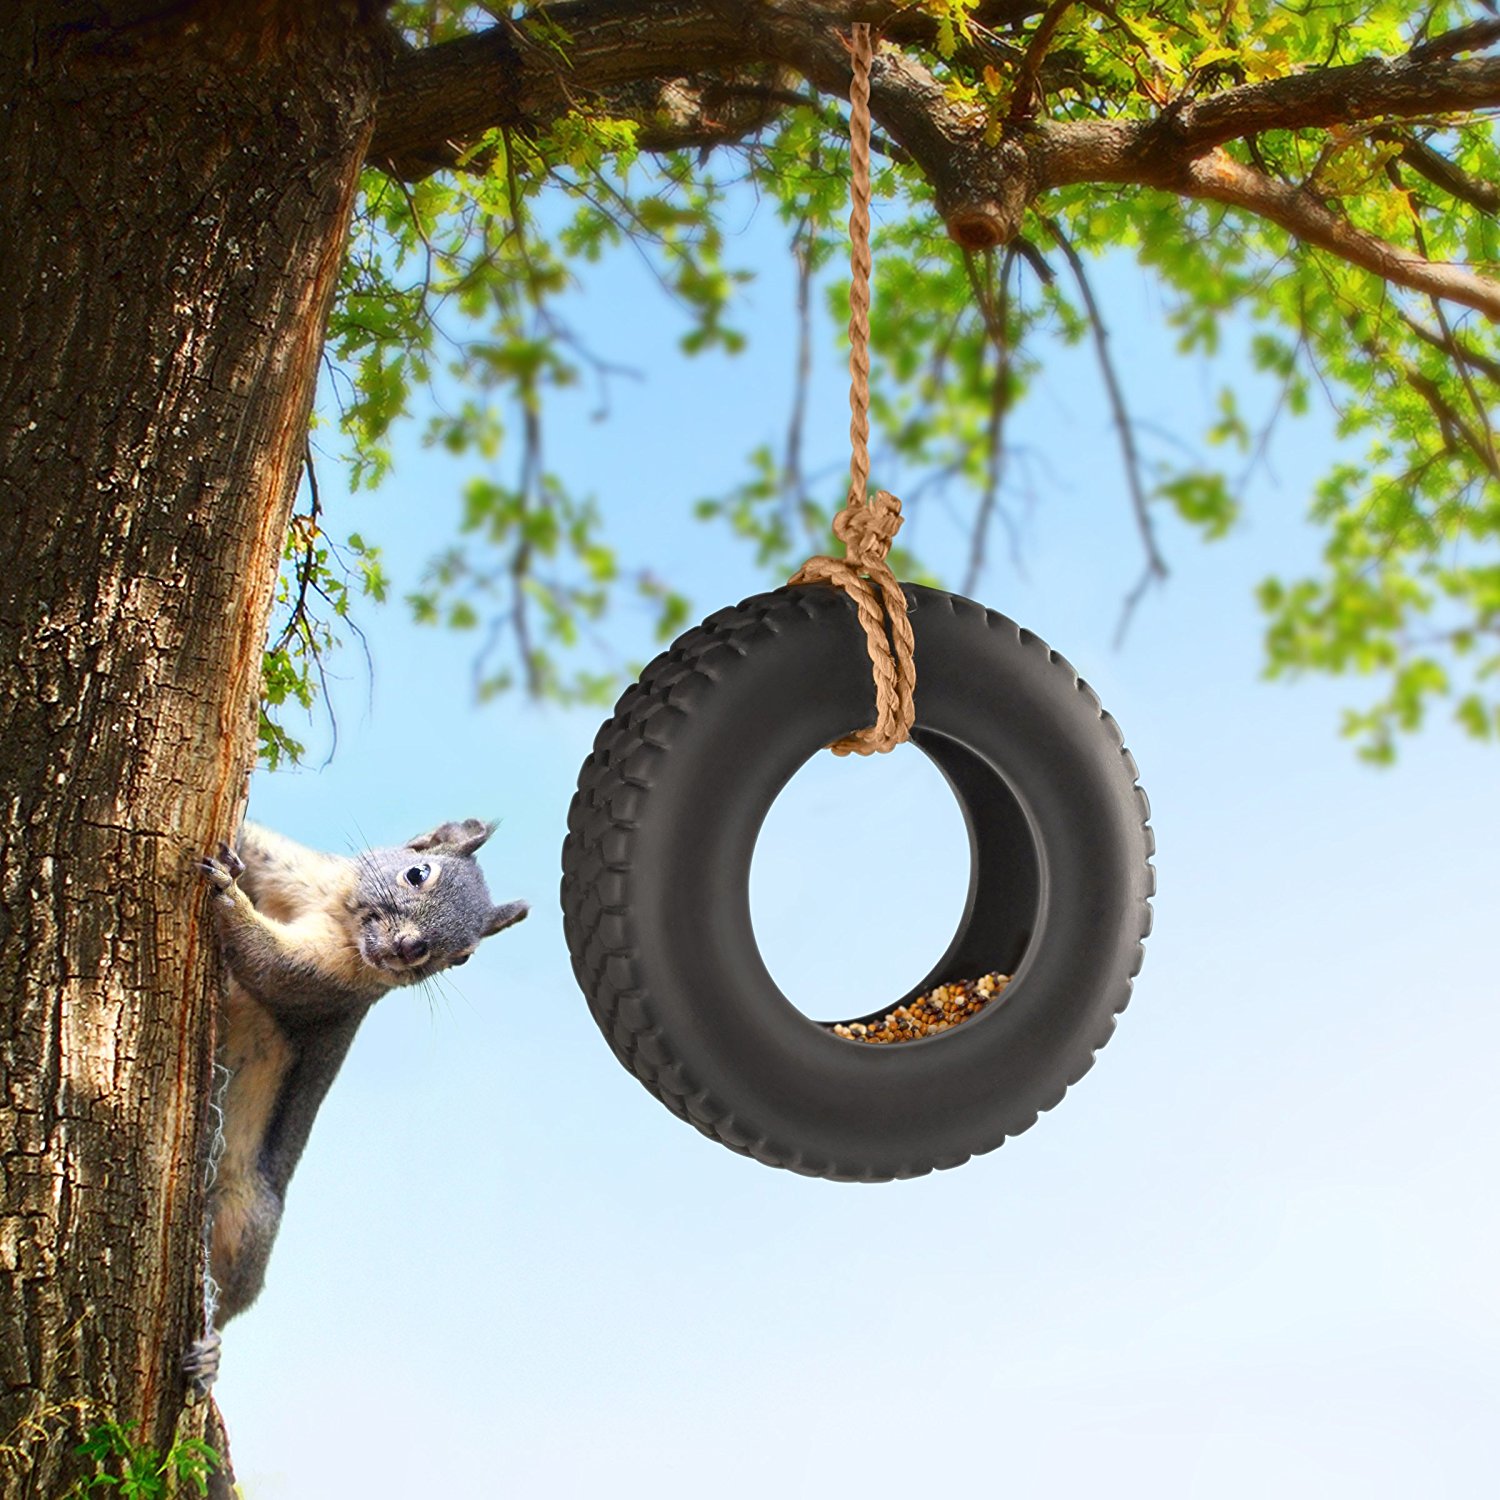 Amazon.com: Fred SWING TIME Tire Swing Bird Feeder: Home & Kitchen